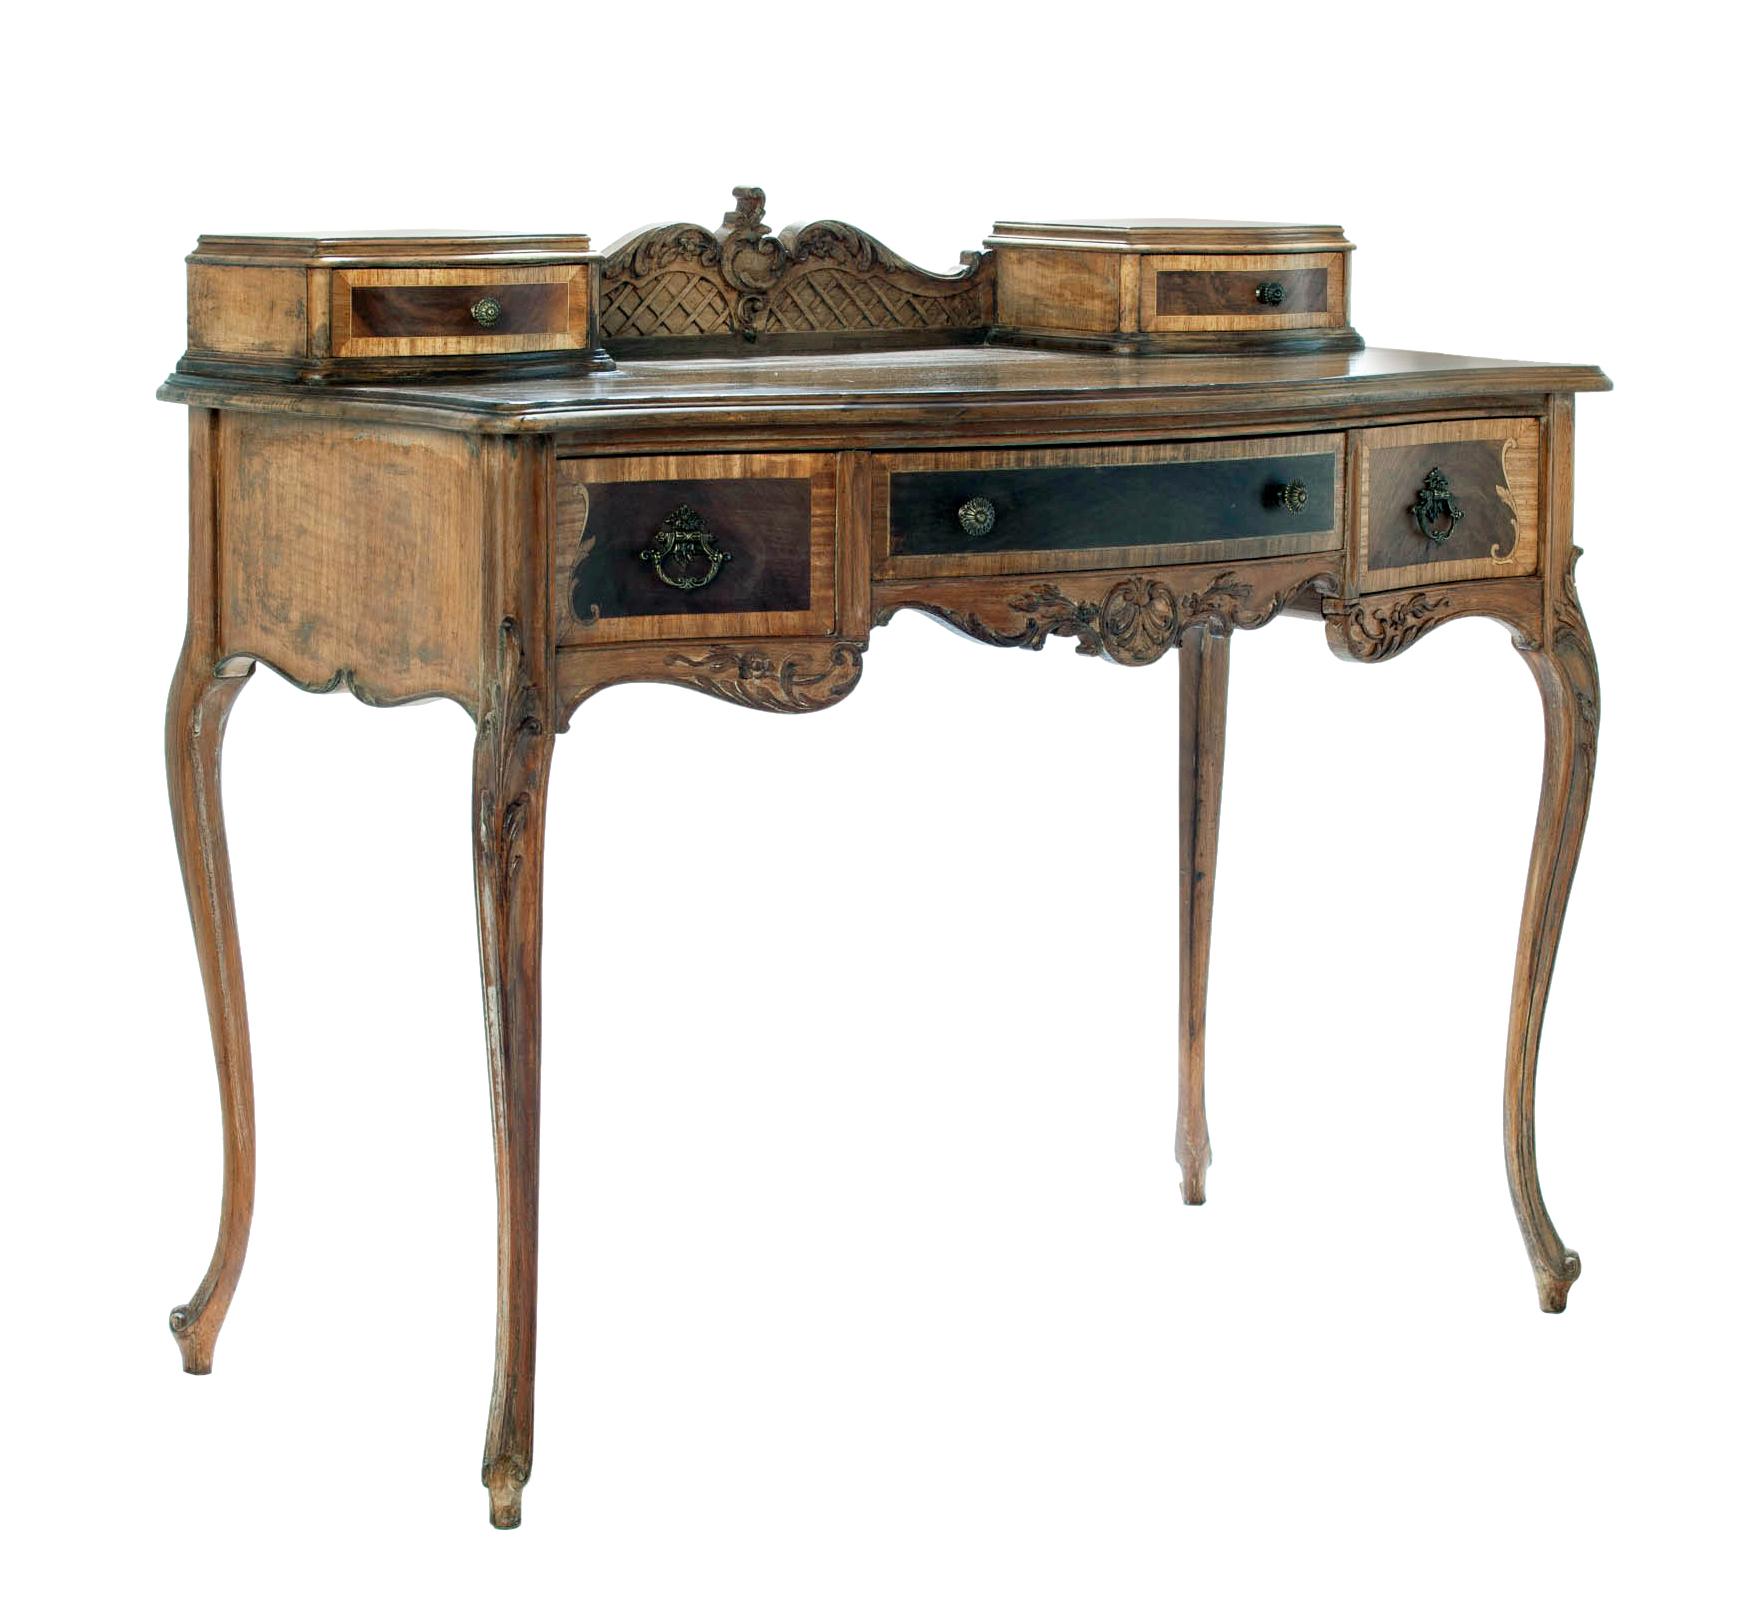 French provincial writing desk with two small upper drawers, two large lower drawer & a large center drawer. Cast brass pulls & knobs. 
Curvy profile with detailed carvings & marquetry. Dovetailed construction.
Hand carved weave pattern & provincial